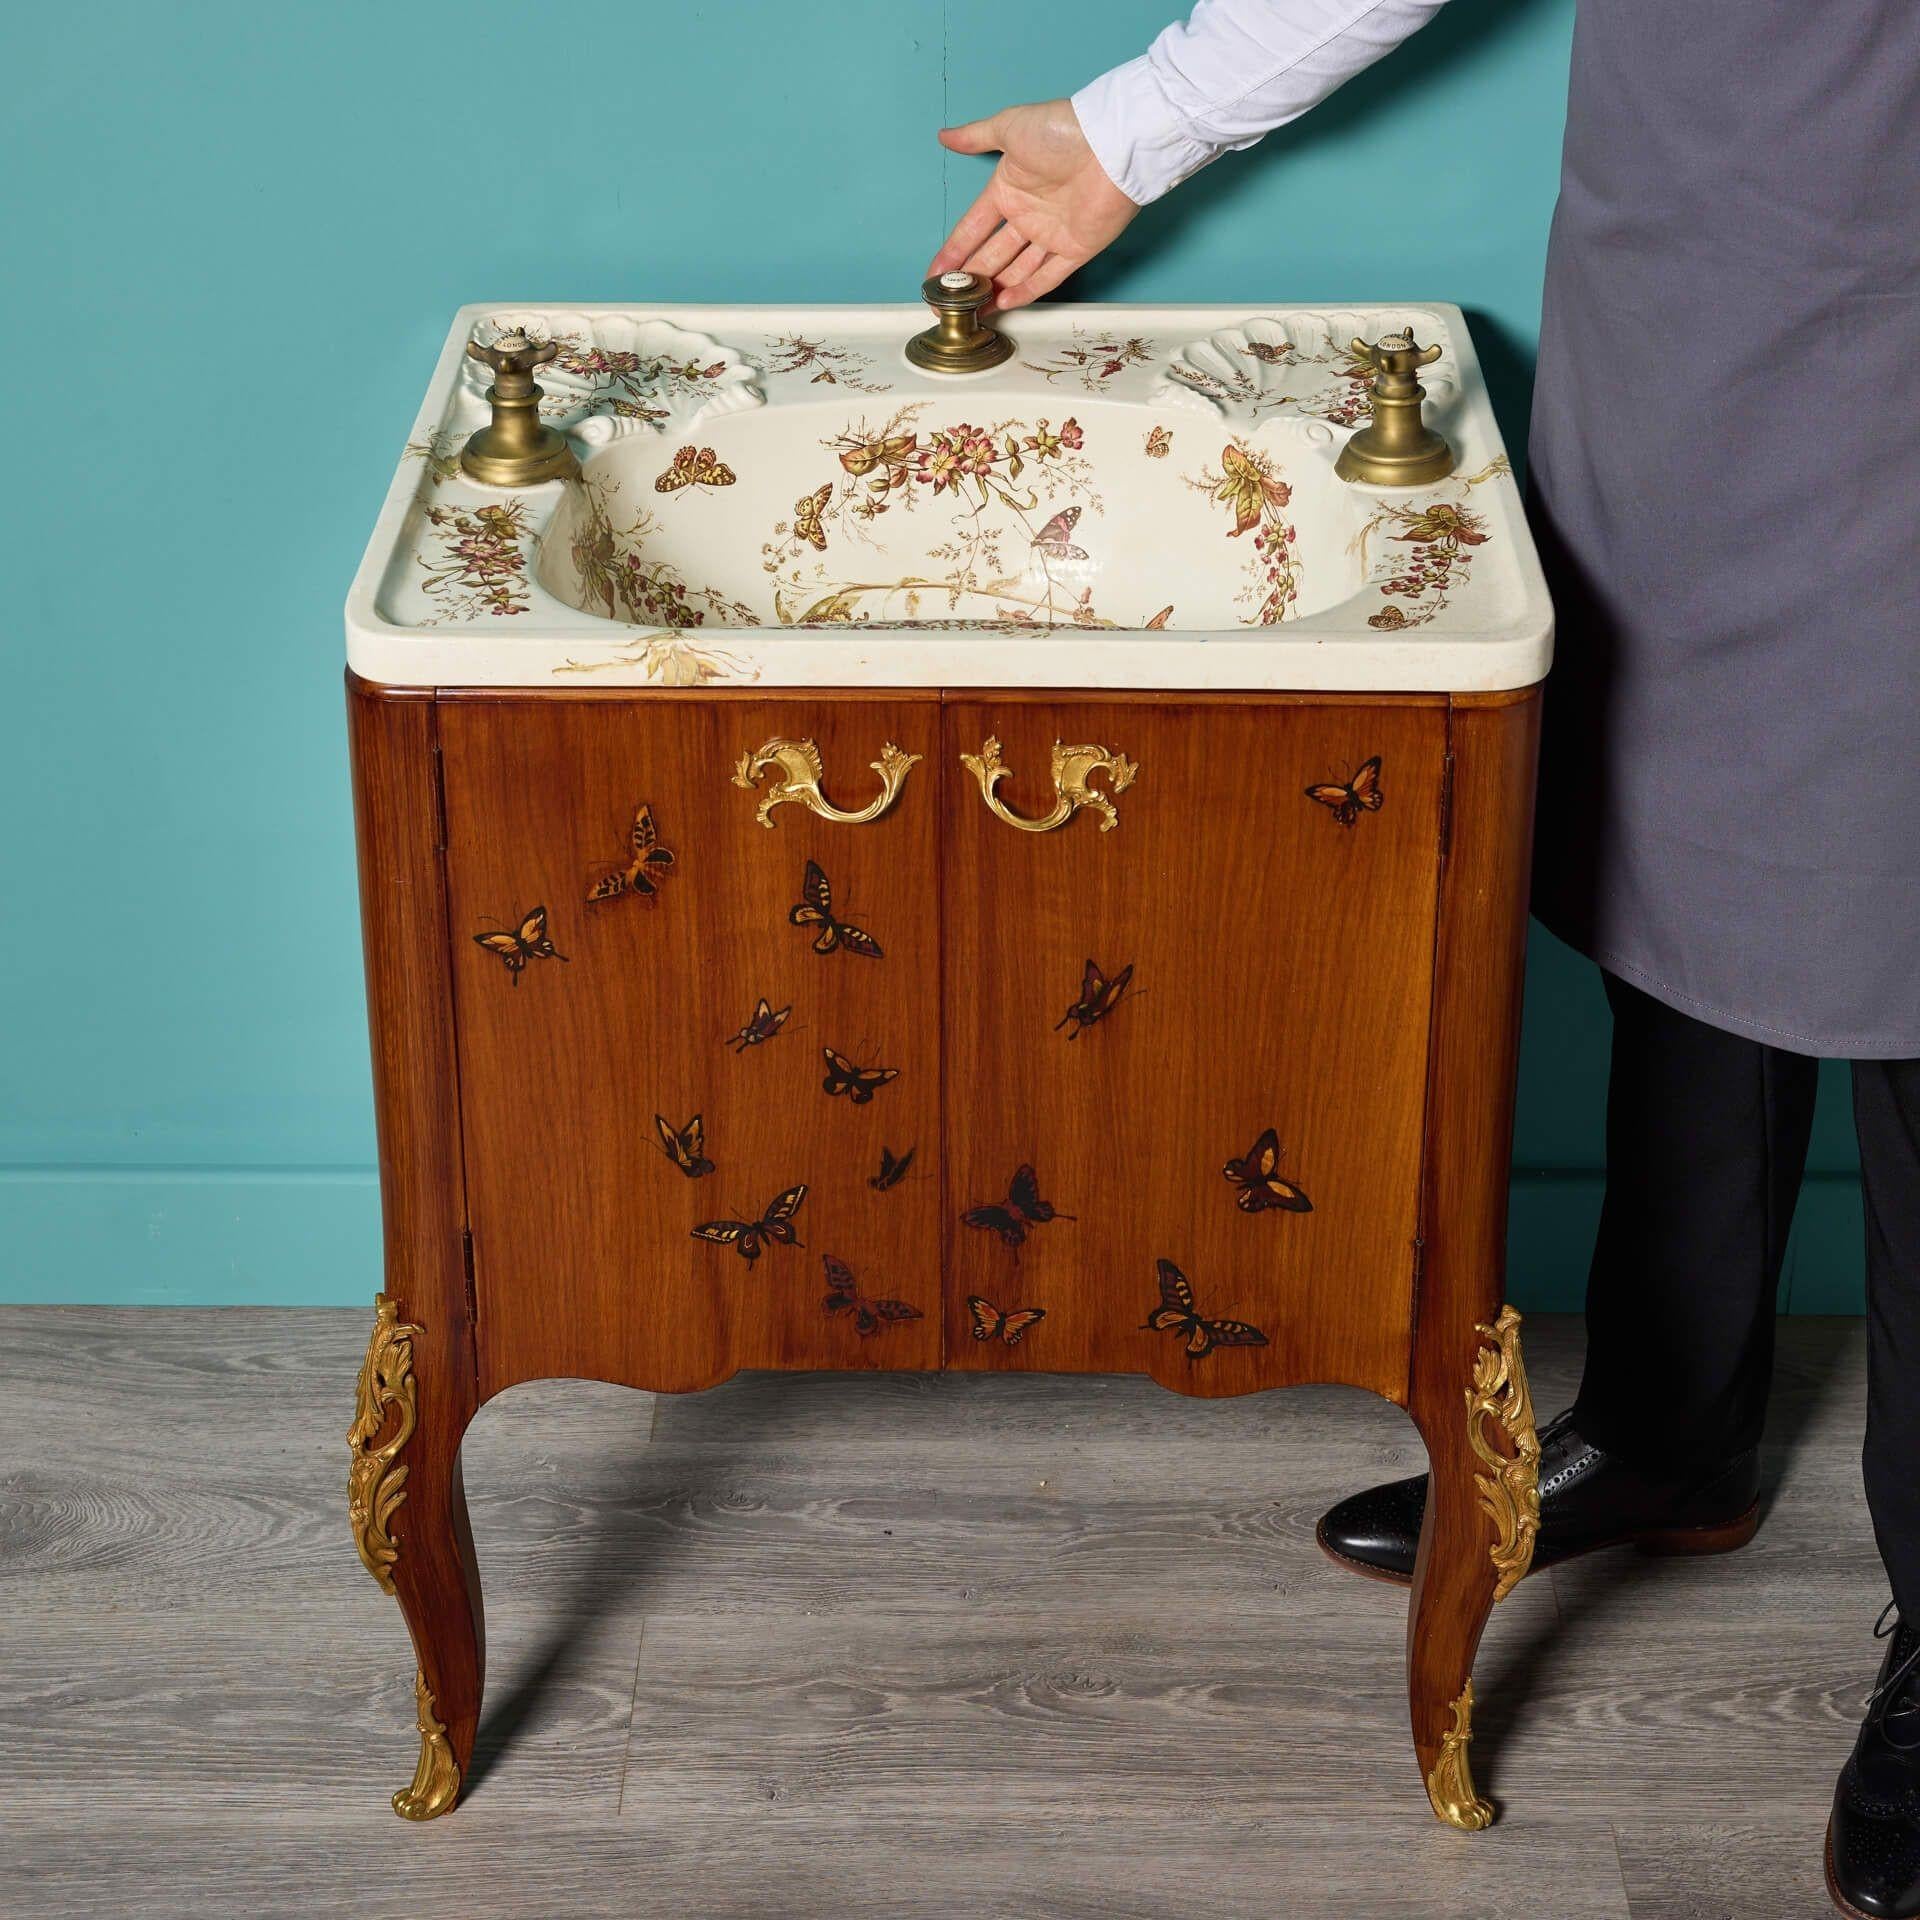 A rare antique George Jennings London wash basin dating to circa 1890. With an original porcelain basin decorated with floral transfers and butterflies, accompanied by scalloped shaped soap dishes, this sink is quite eye-catching; making it ideal